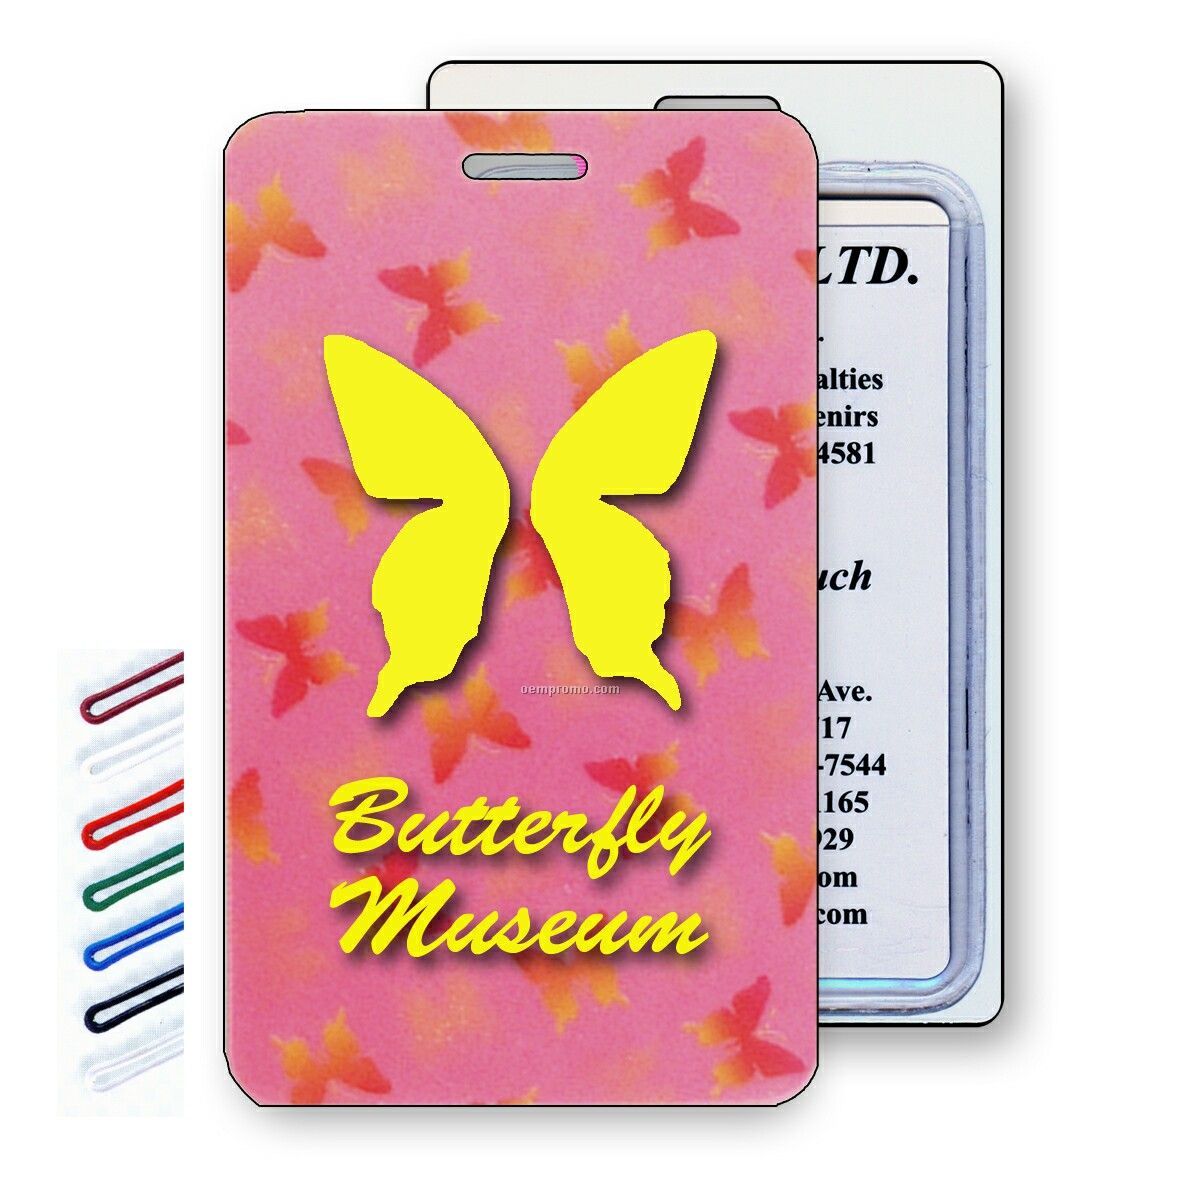 Lenticular Luggage Tags Change Color (Multi-color Butterflies)